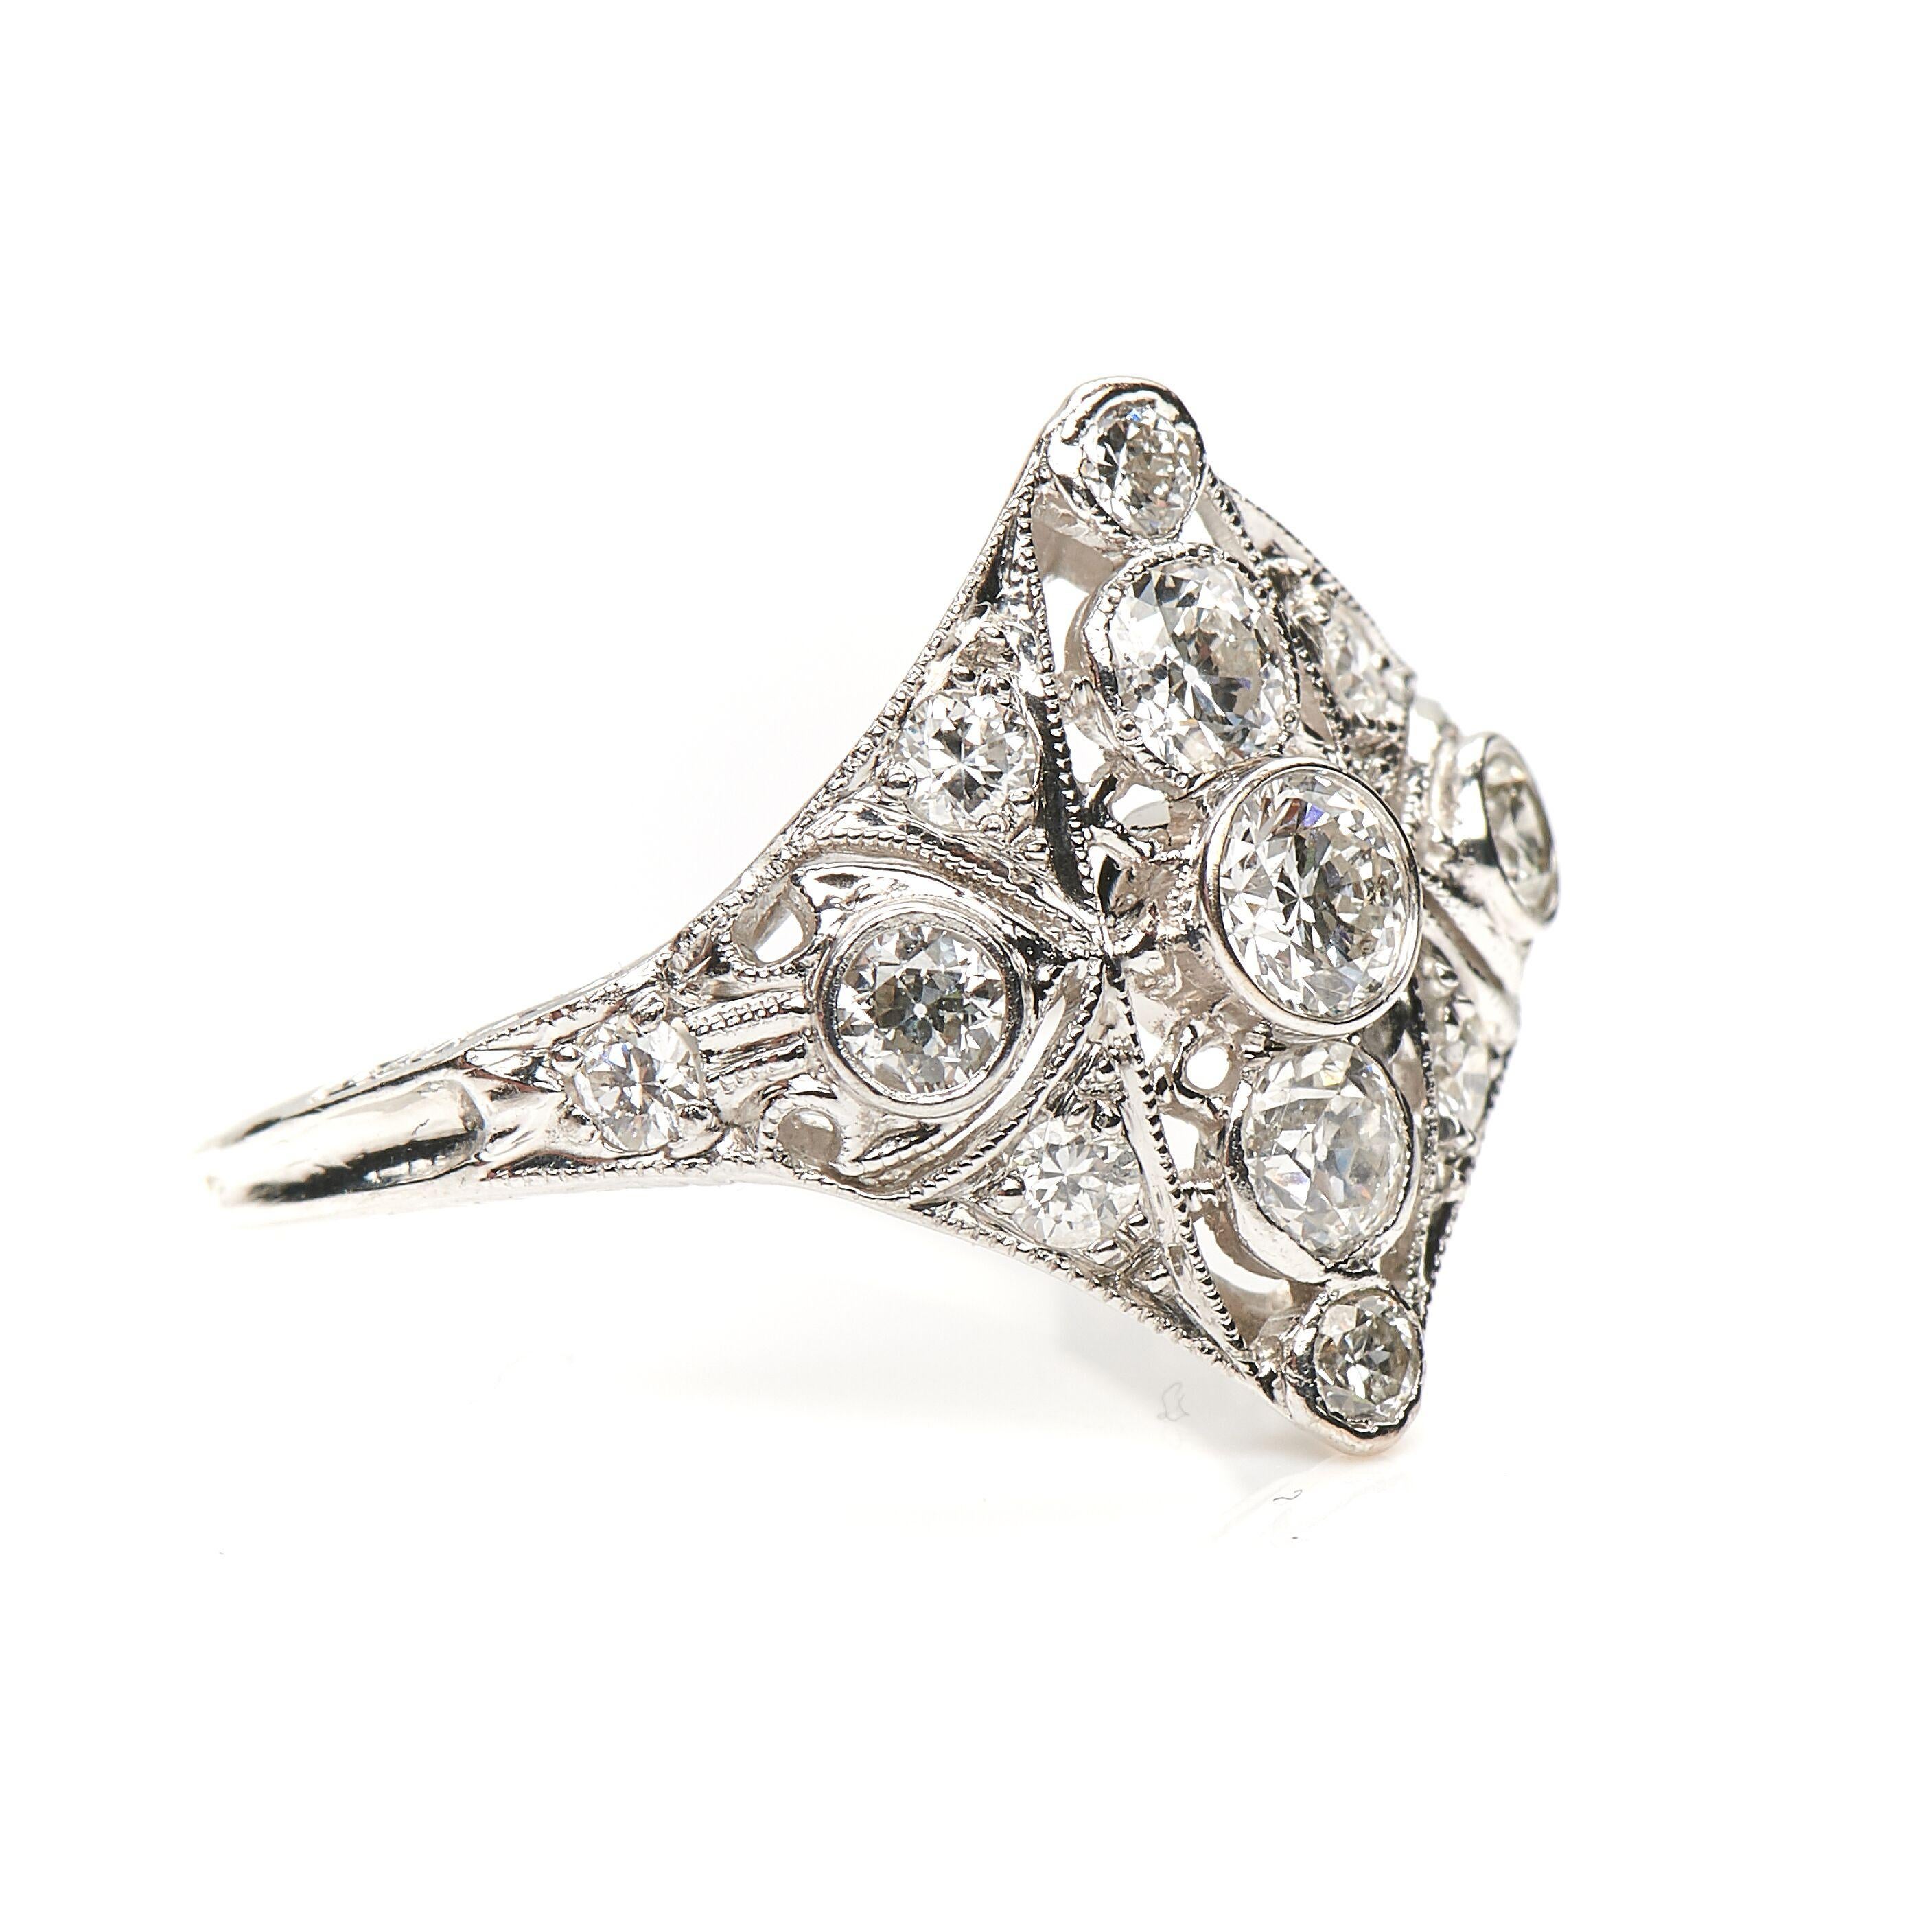 Diamond ring, early 20th century. The intricately pierced and millegrain-stippled setting of this ring showcase the heights of technical excellence reached by jewellers in the opening decades of the 20th century, when the discovery of platinum